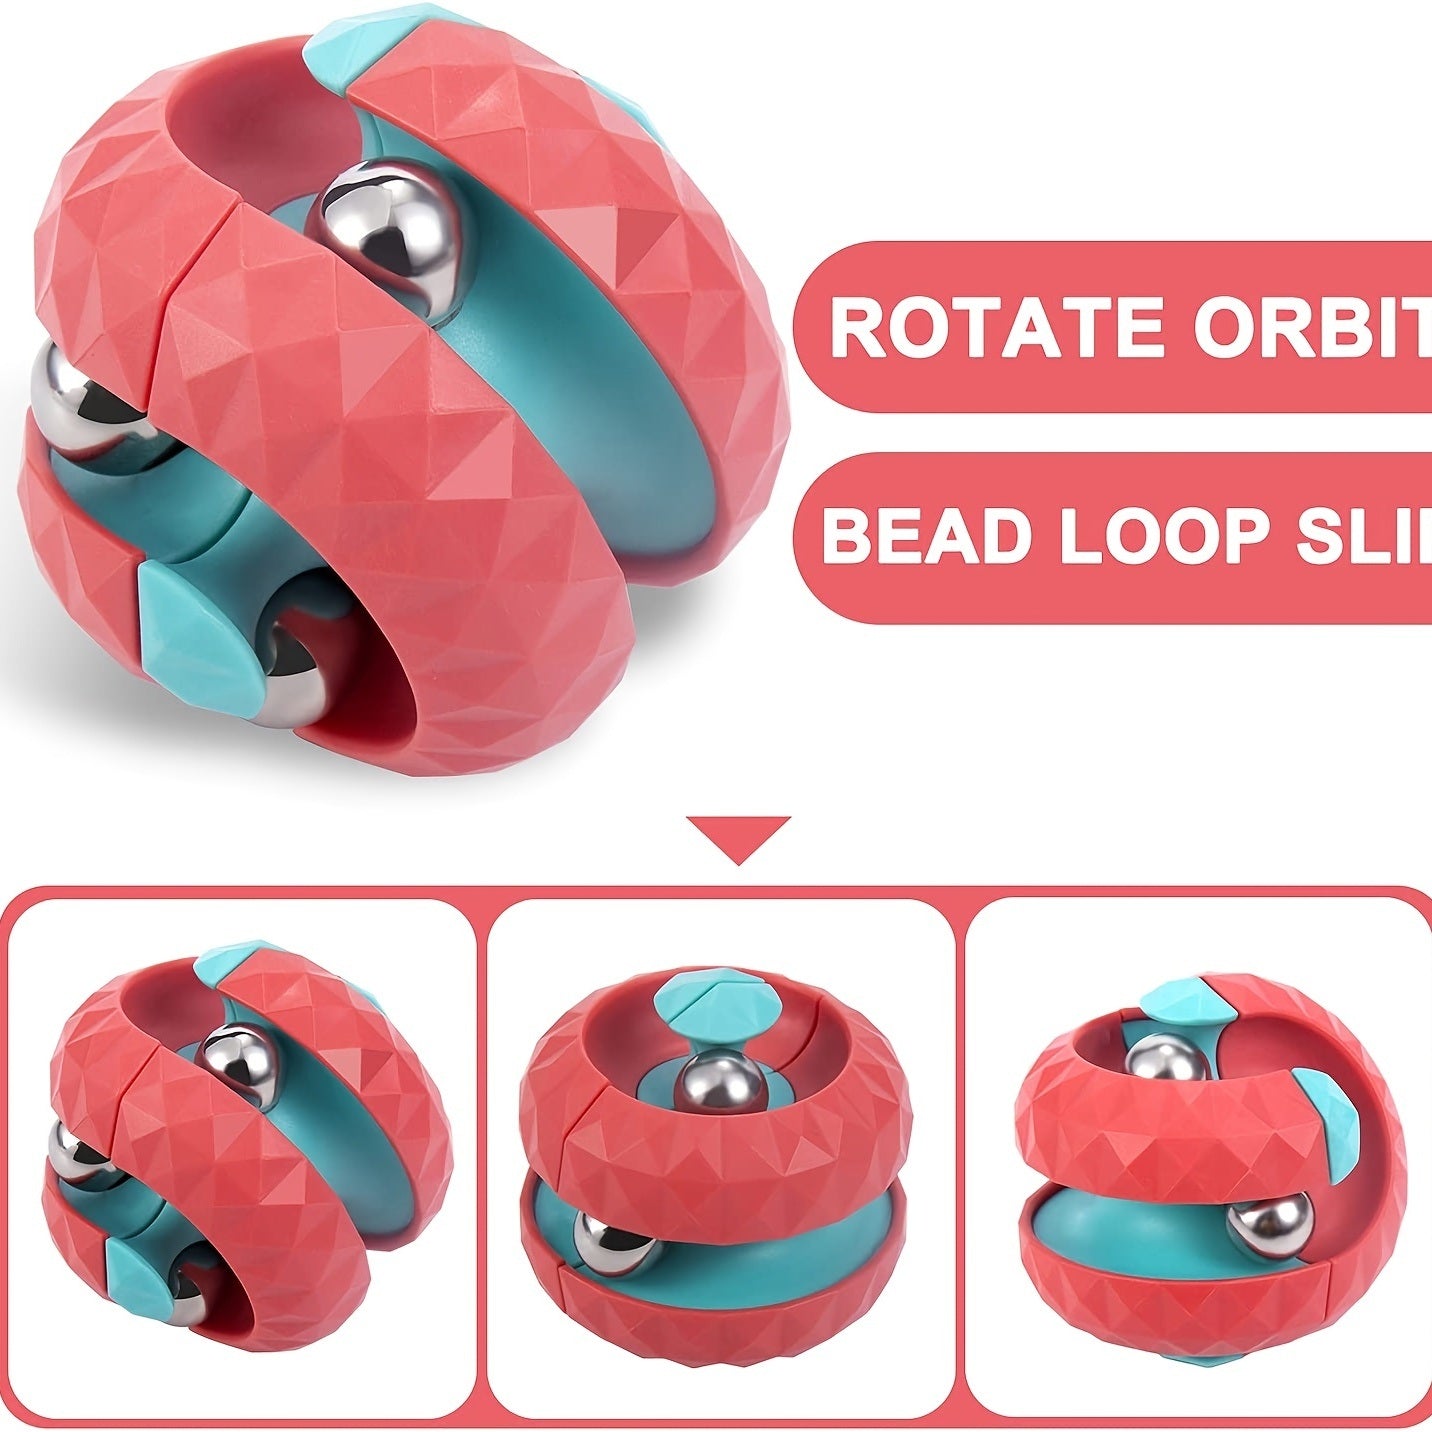 Diagram demonstrating the "Orbit Ball Toy" method which does not offer any specific information about the product, with four steps showing movable parts in circular tracks. More detailed information about the product is needed to accurately determine relevant SEO keywords.